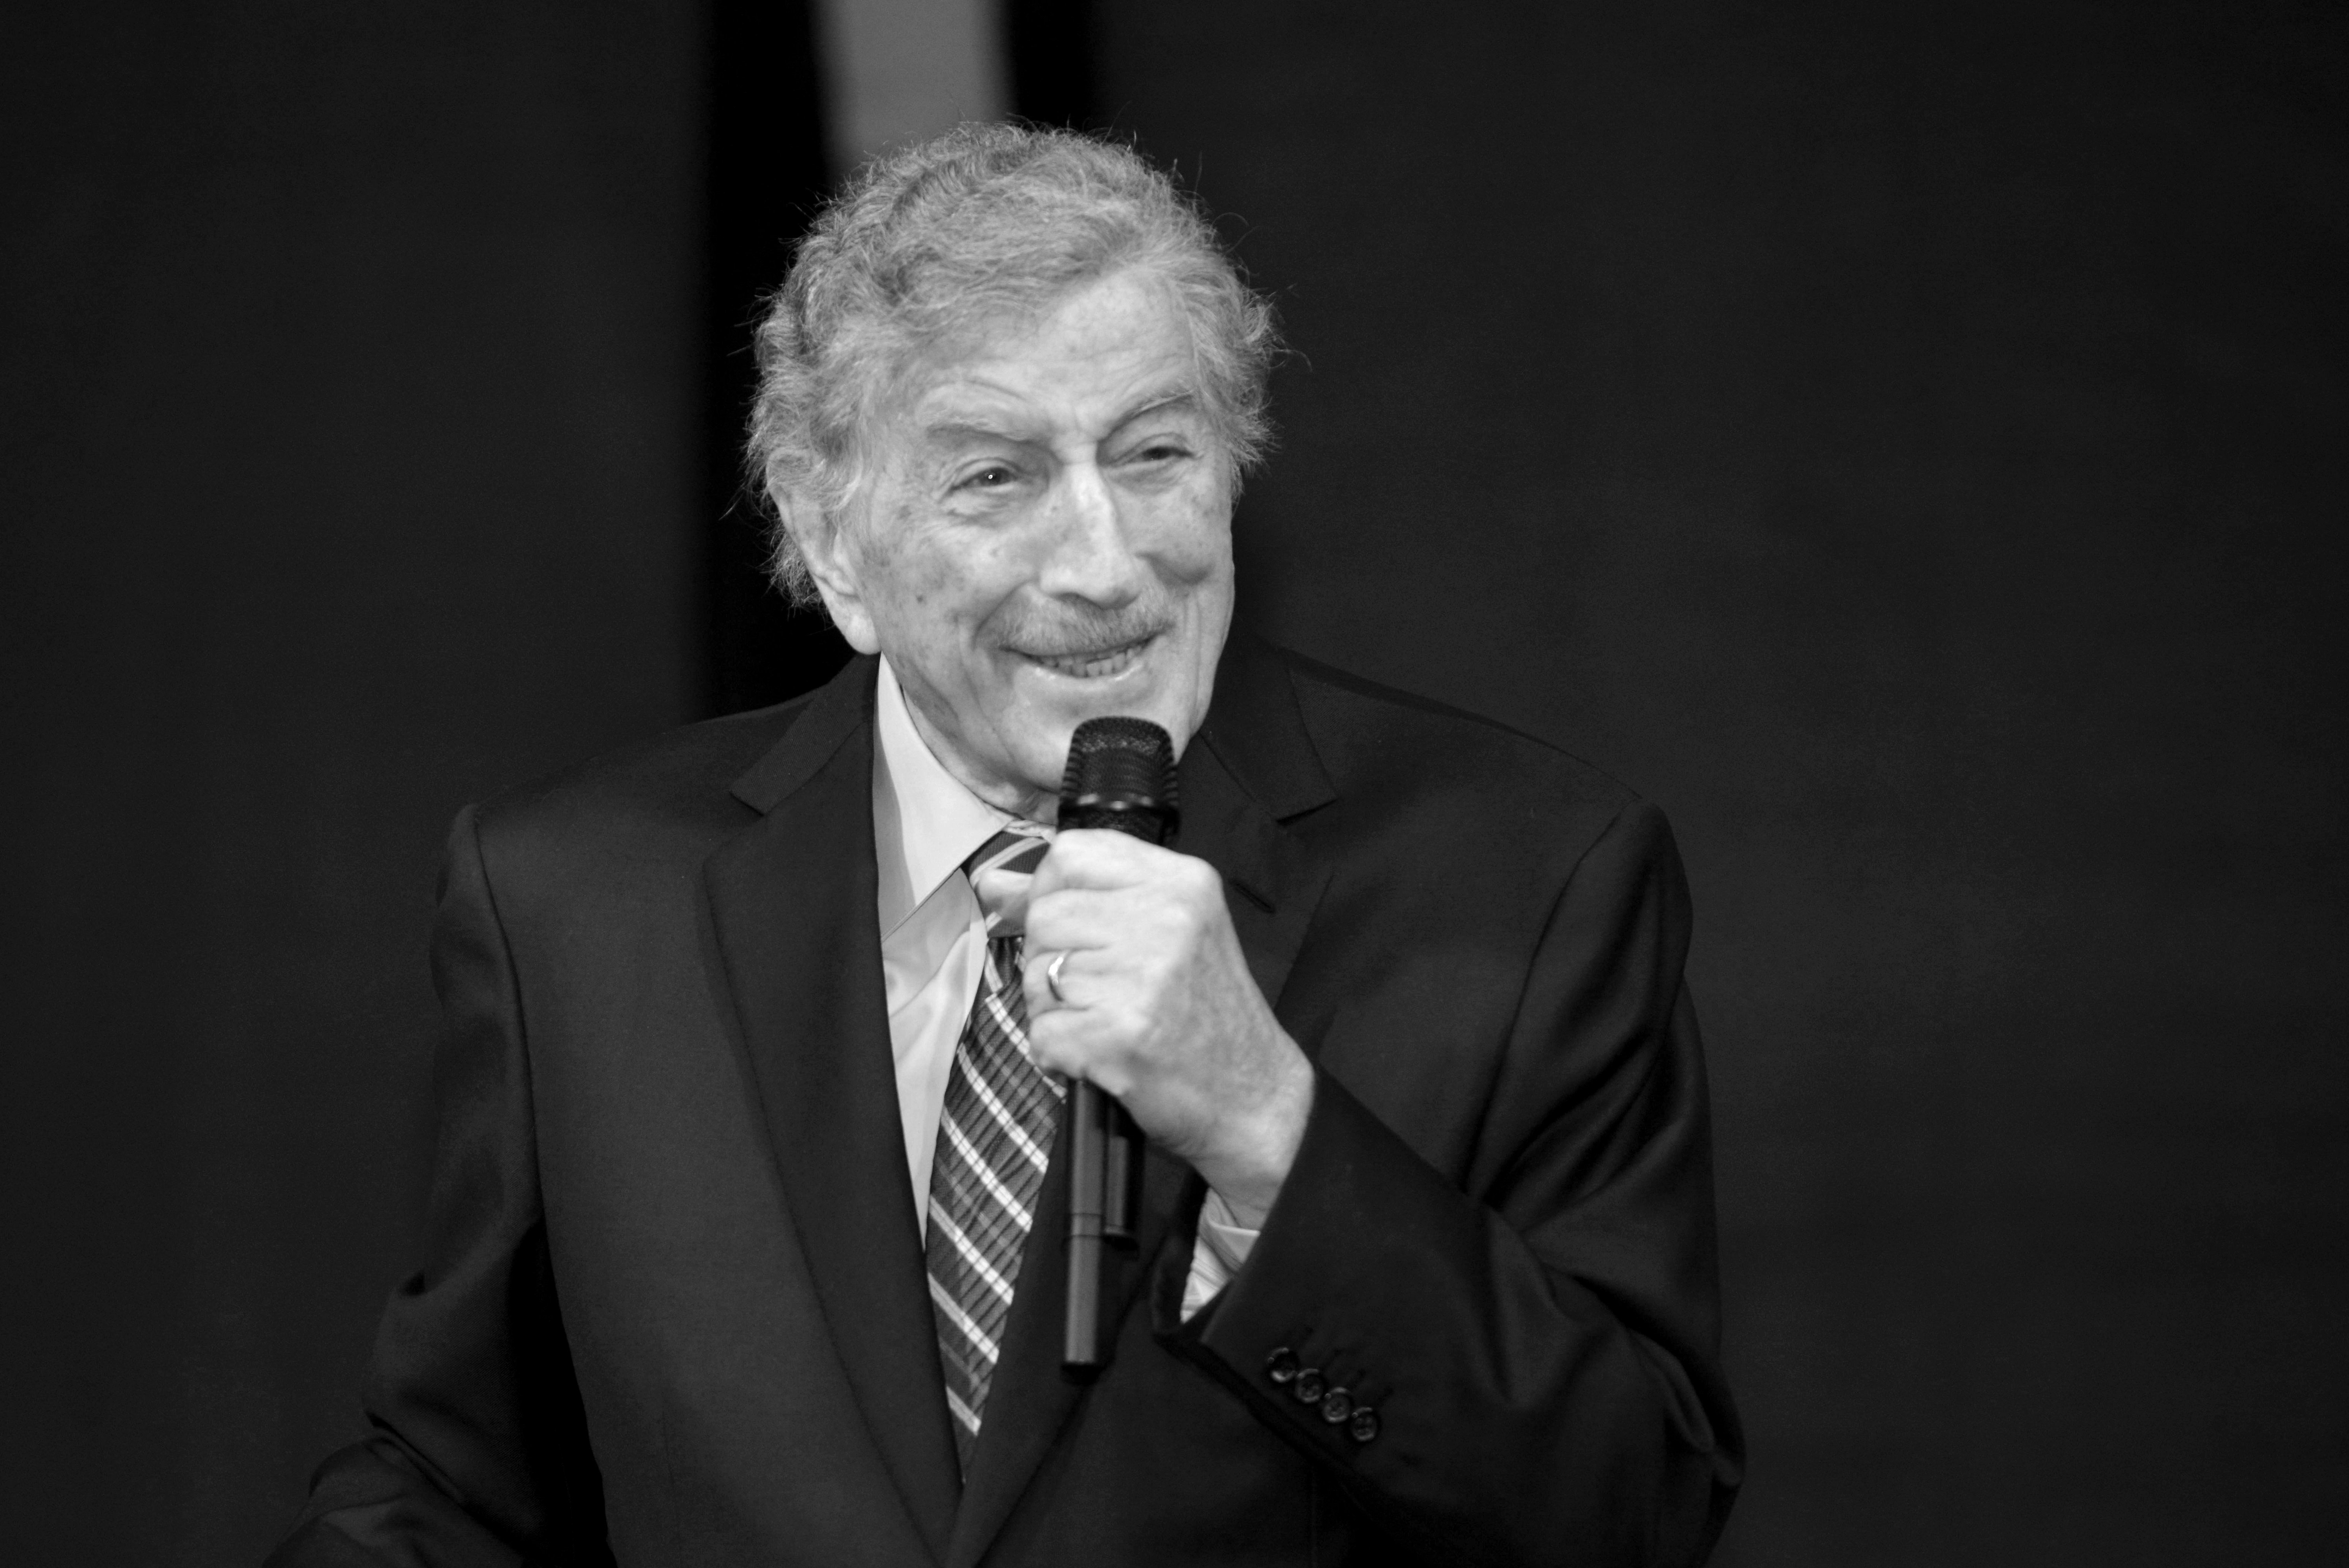 Tony Bennett performs onstage during the Central Park Conservancy Supper Club at Rumsey Playfield, Central Park on November 20, 2019 in New York City.  | Source: Getty Images